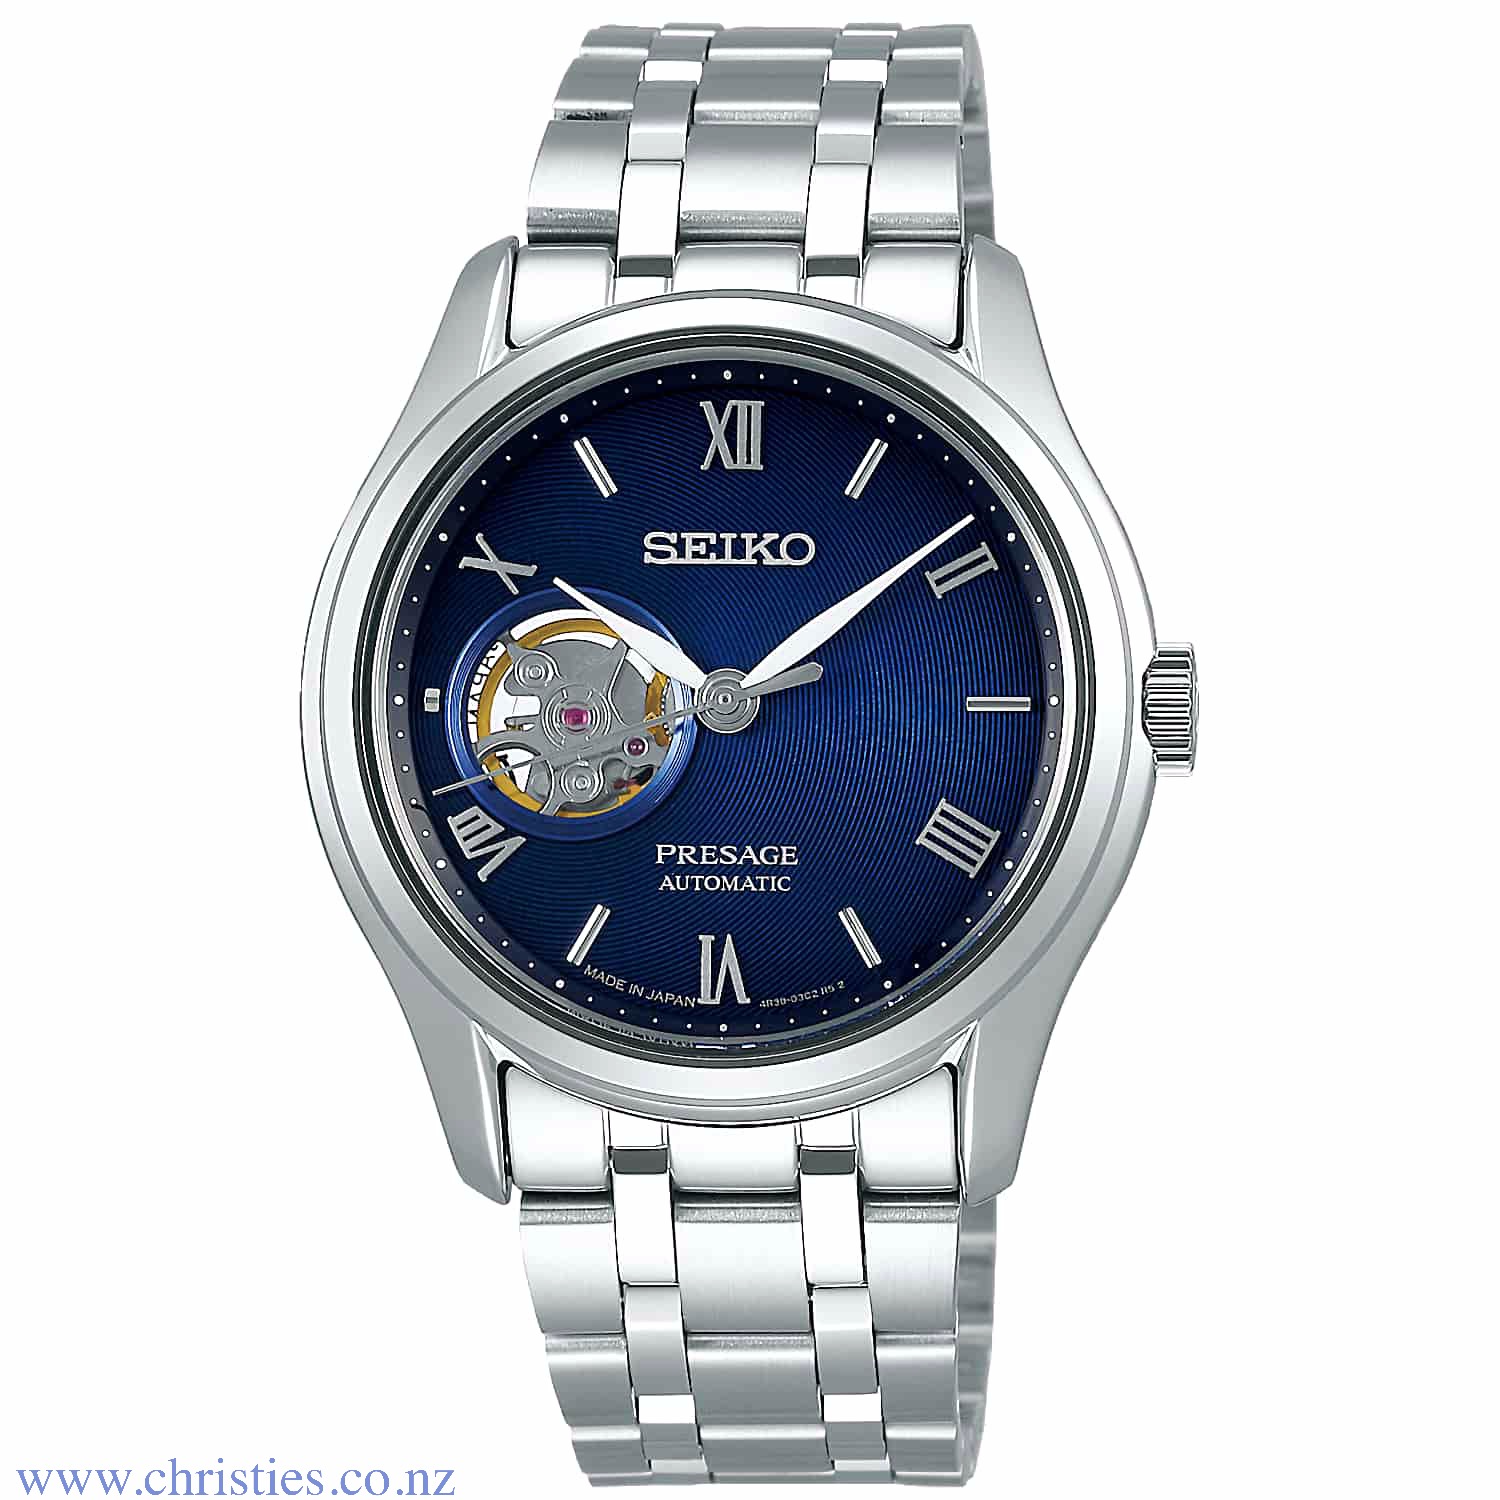 SSA411J1 SEIKO Presage Zen Garden Karesansui  Automatic Watch. The Japanese garden is a well-known and much admired aspect of Japanese culture and provides the inspiration for this new Presage collection. The dial has the depth and rich texture of a Kares